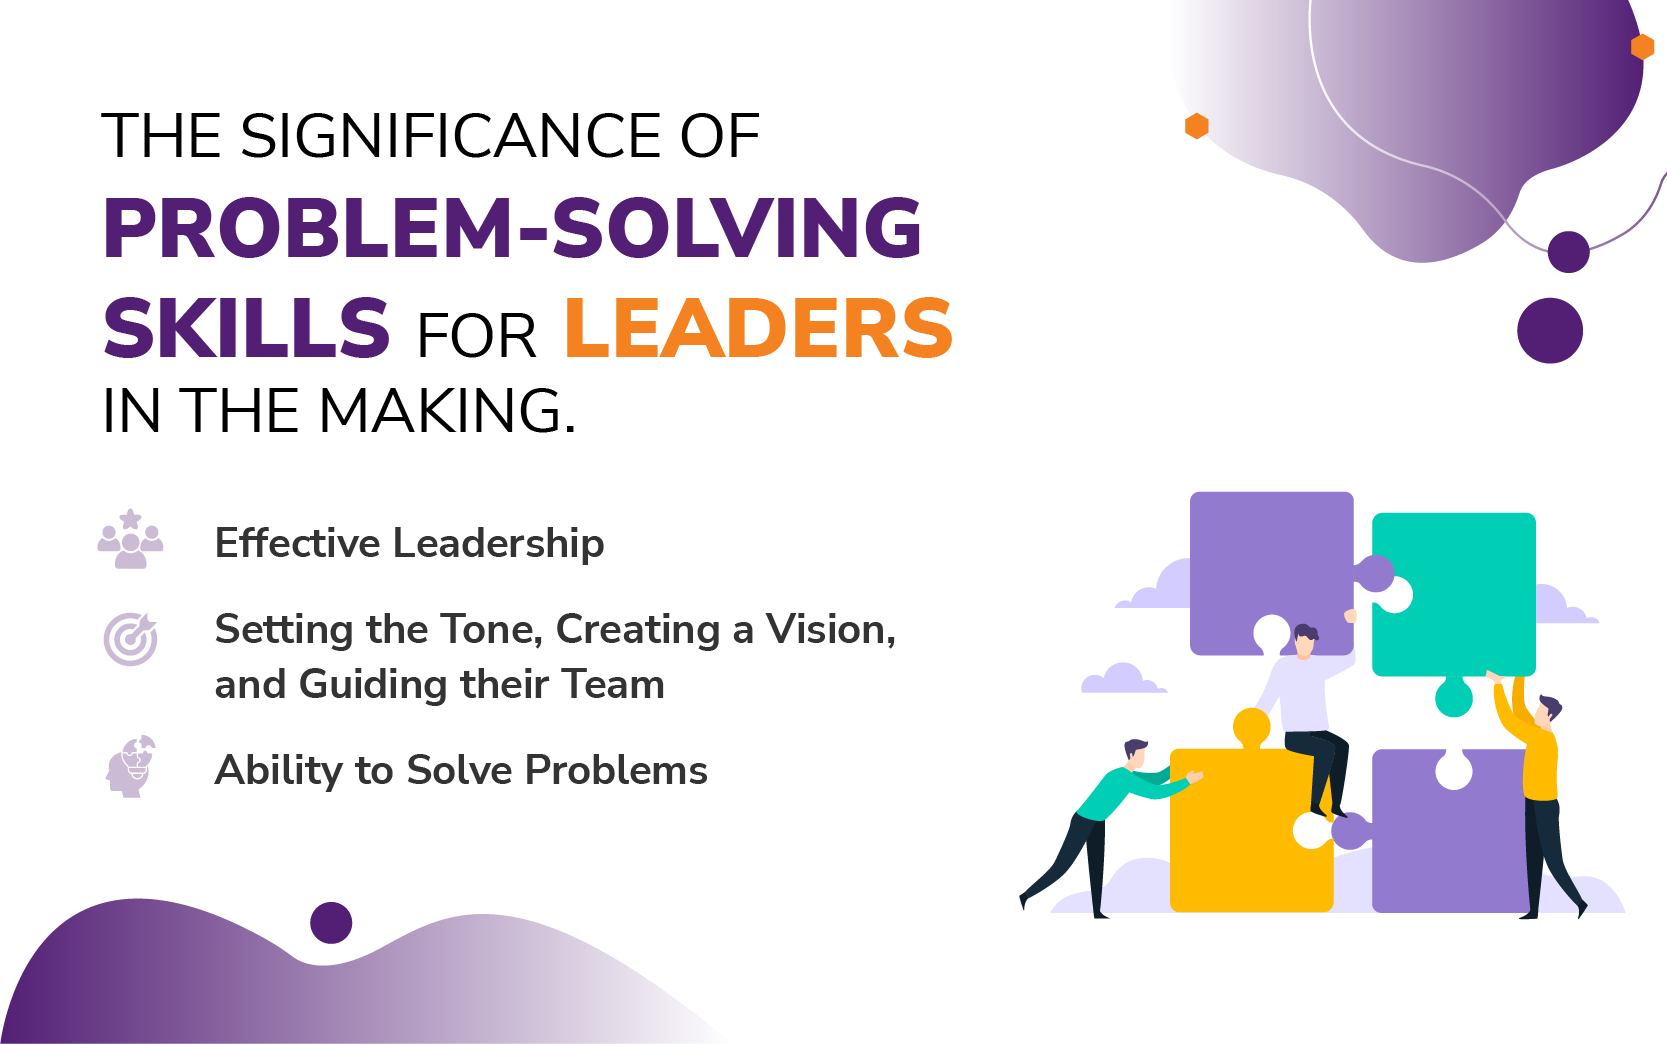 why is problem solving important for leaders